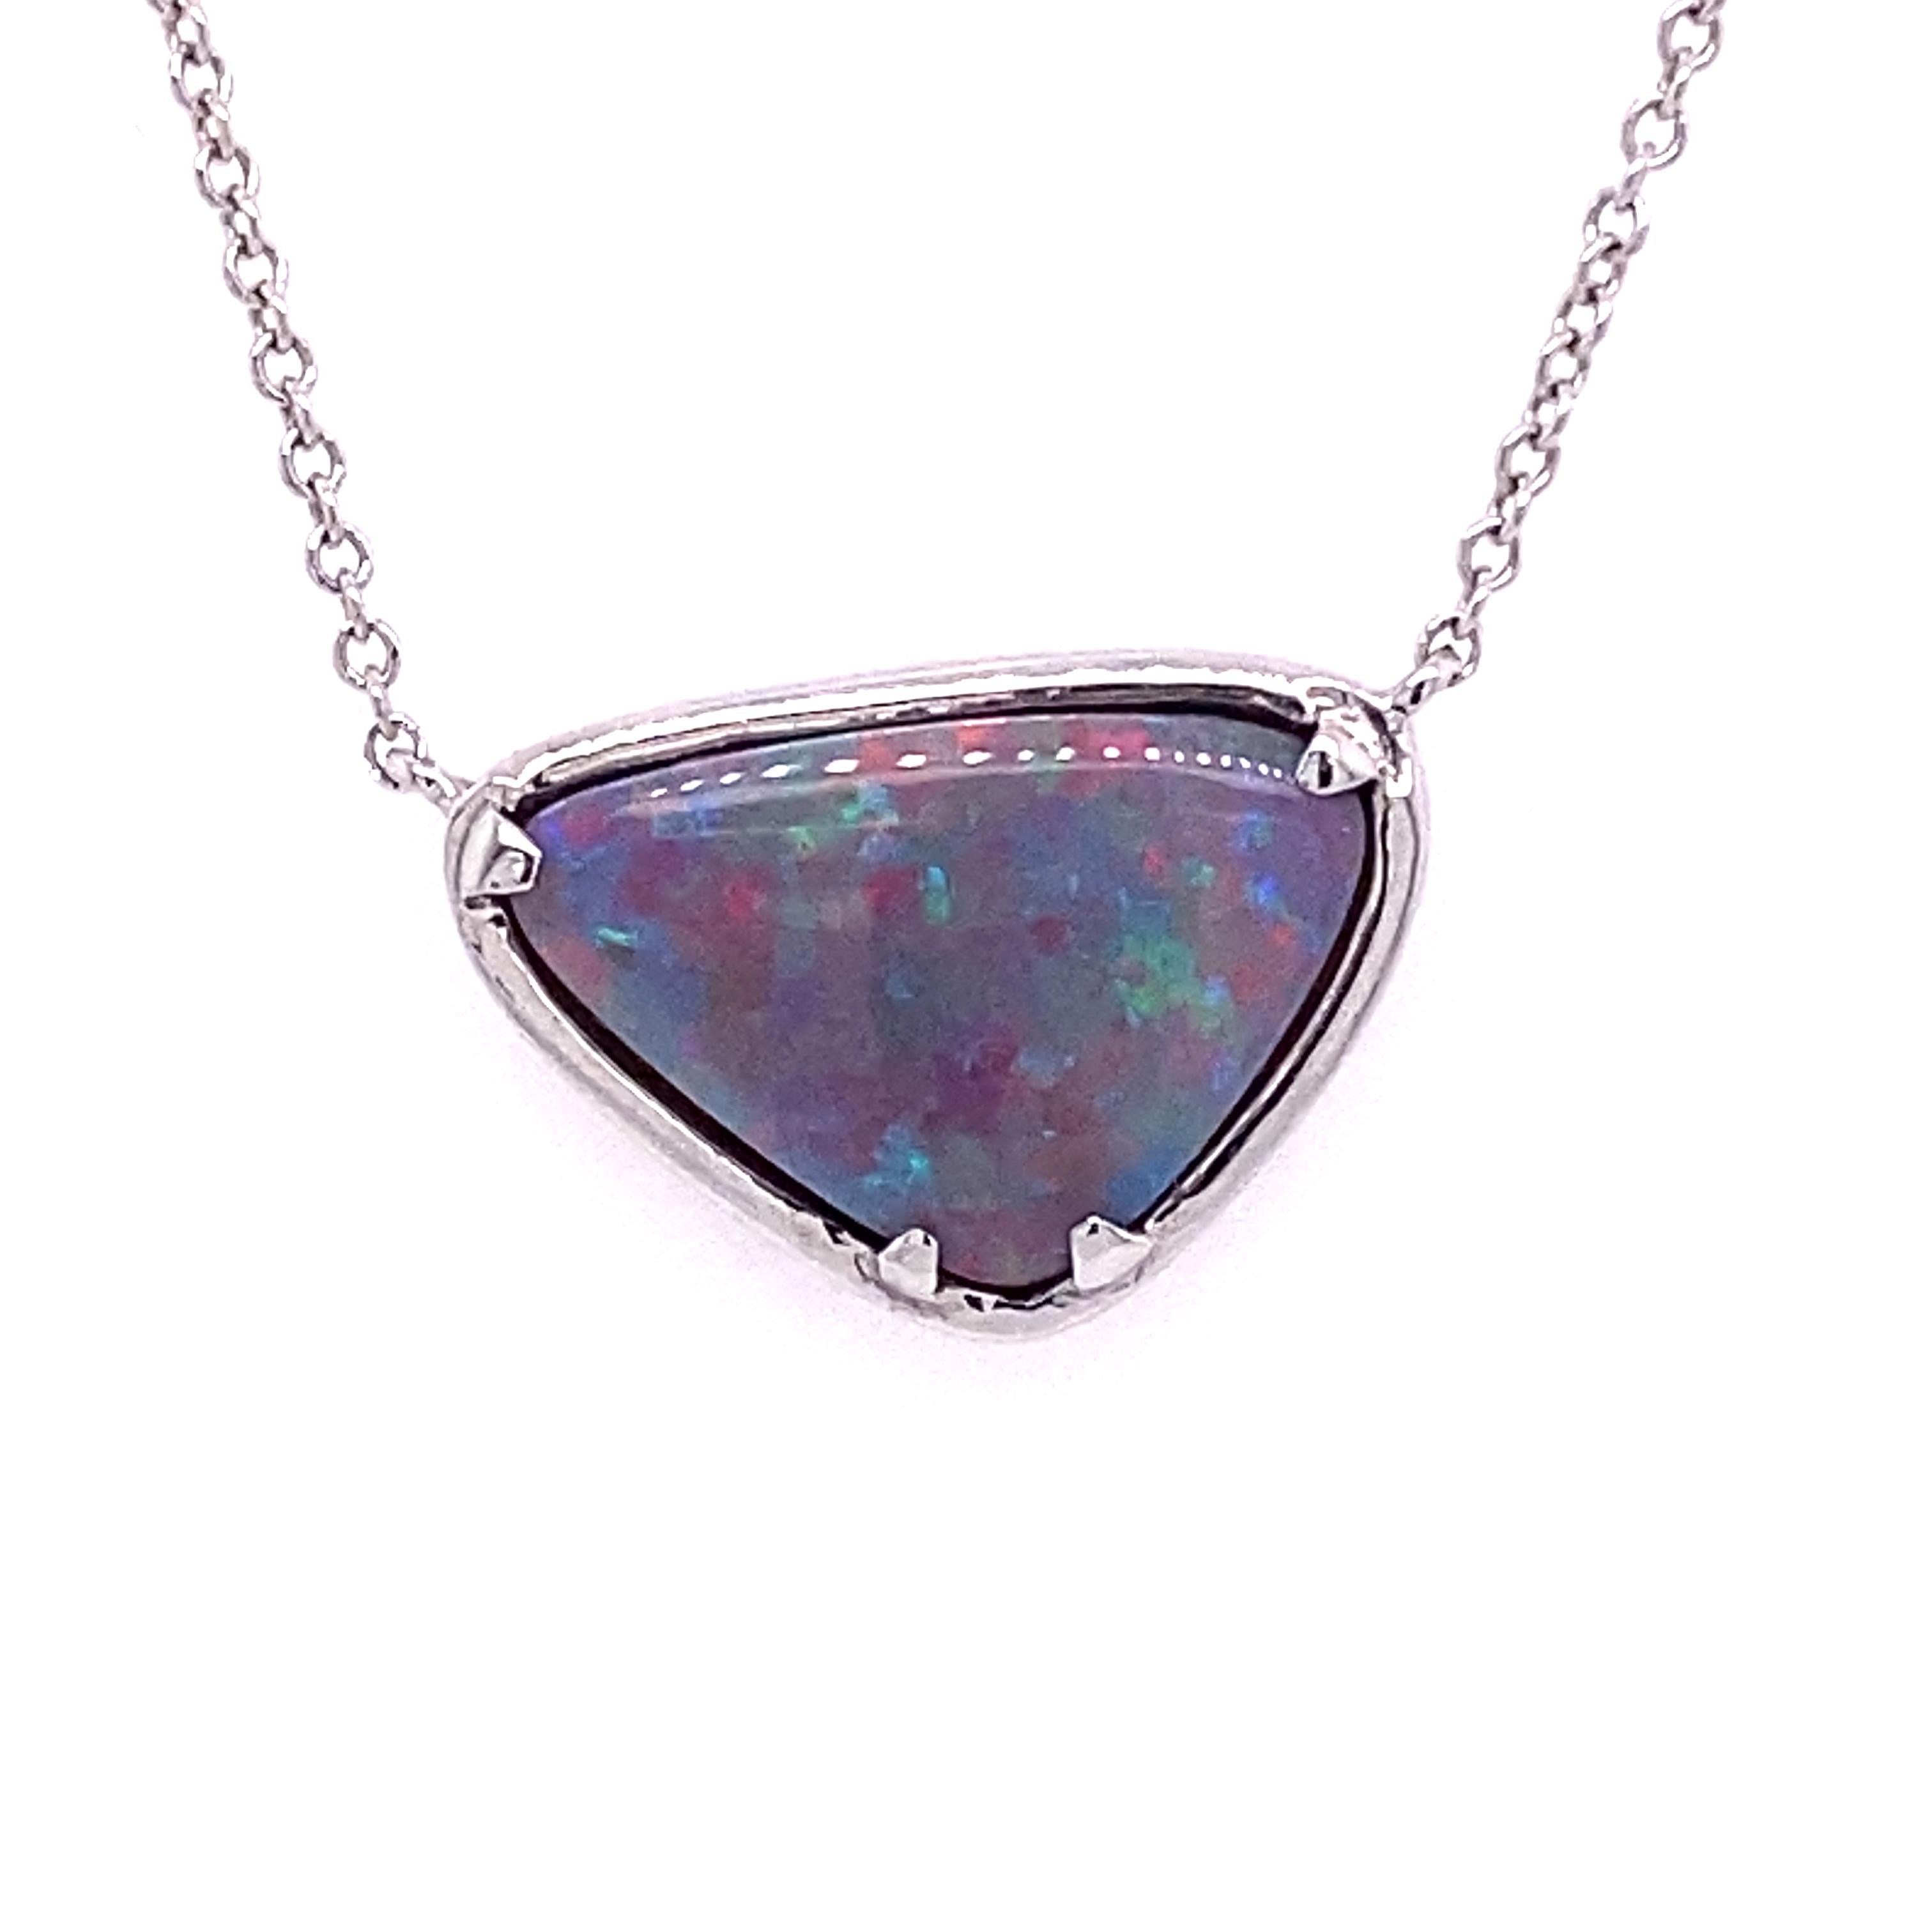 This beautiful pendant features a natural 1.96ctw natural black opal set in 18 karat white gold on an 18